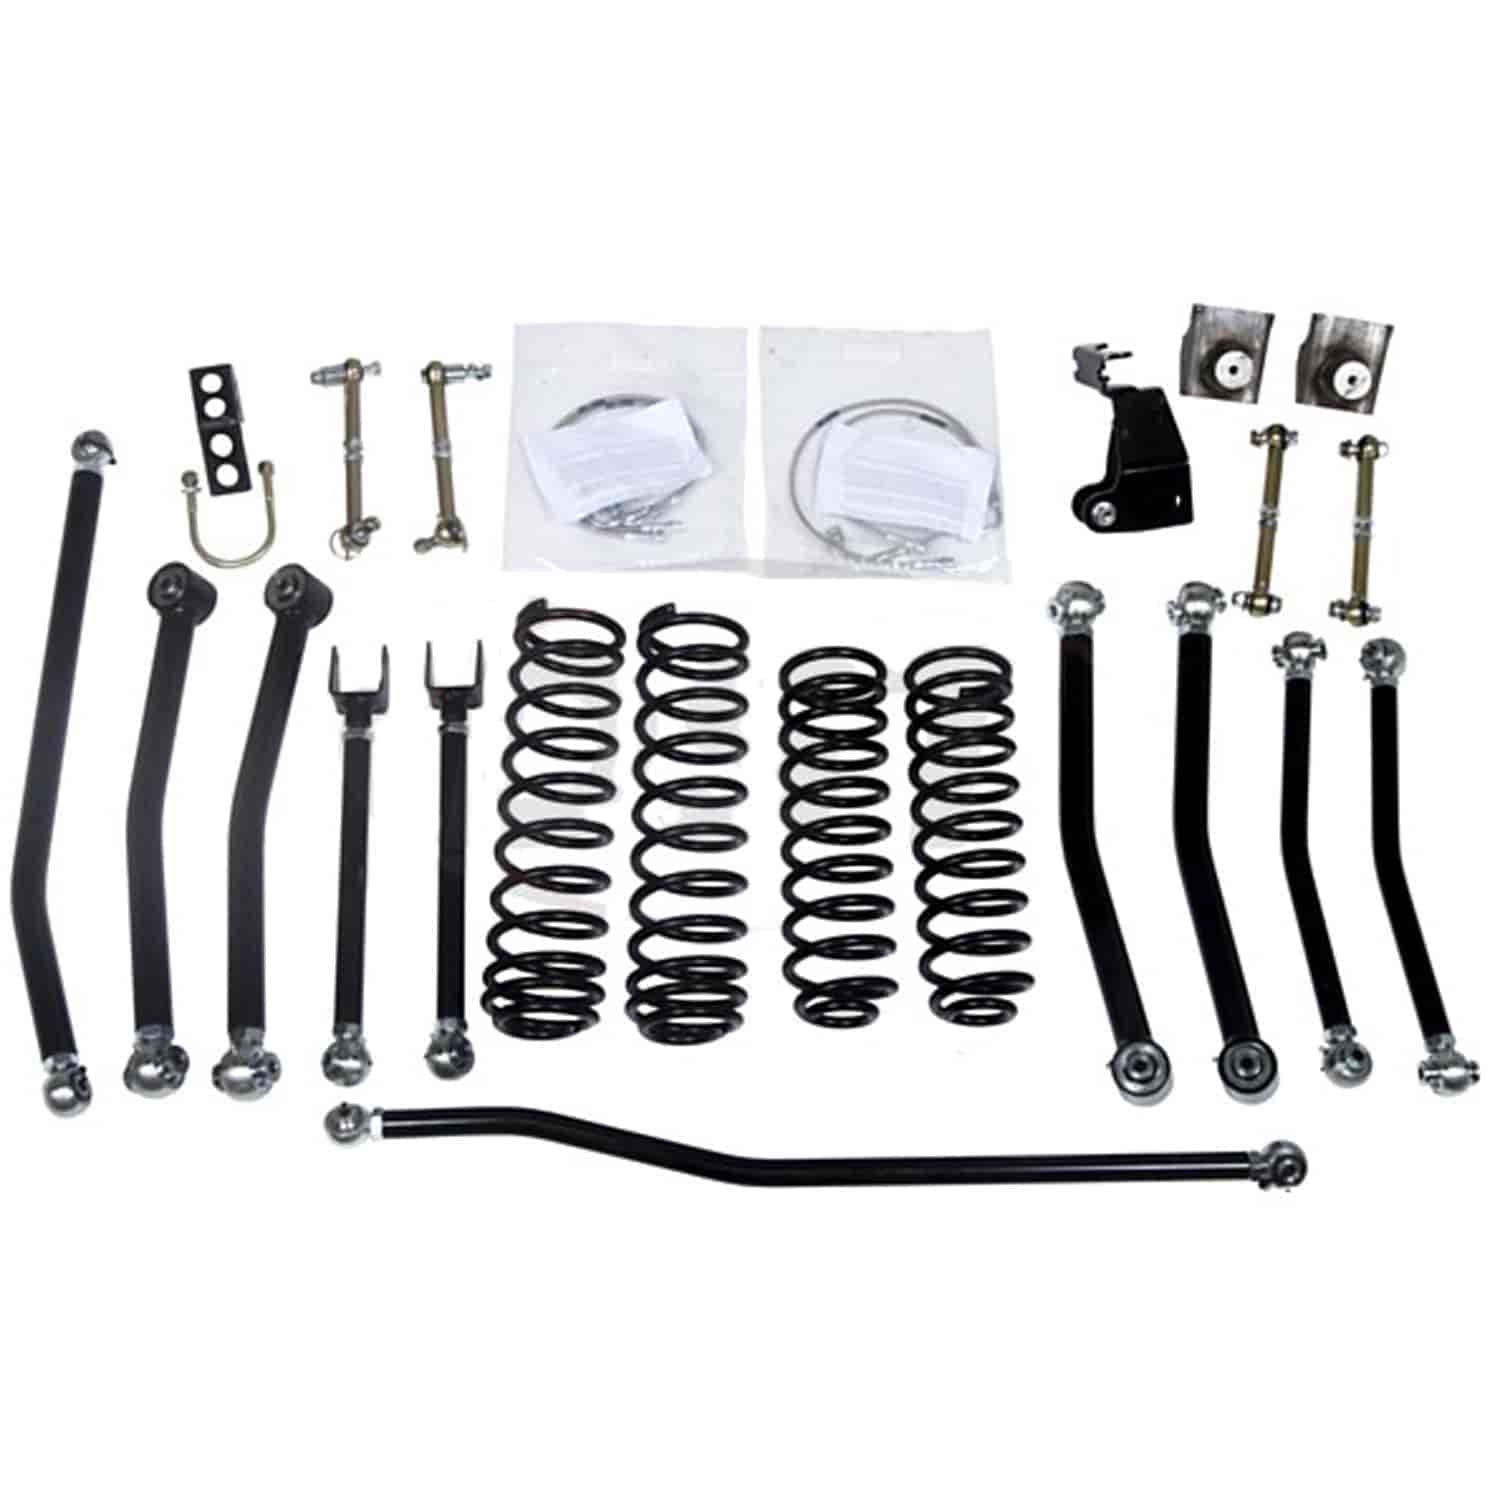 KJ09175BK Front and Rear Suspension Lift Kit, Lift Amount: 3 in. Front/3 in. Rear